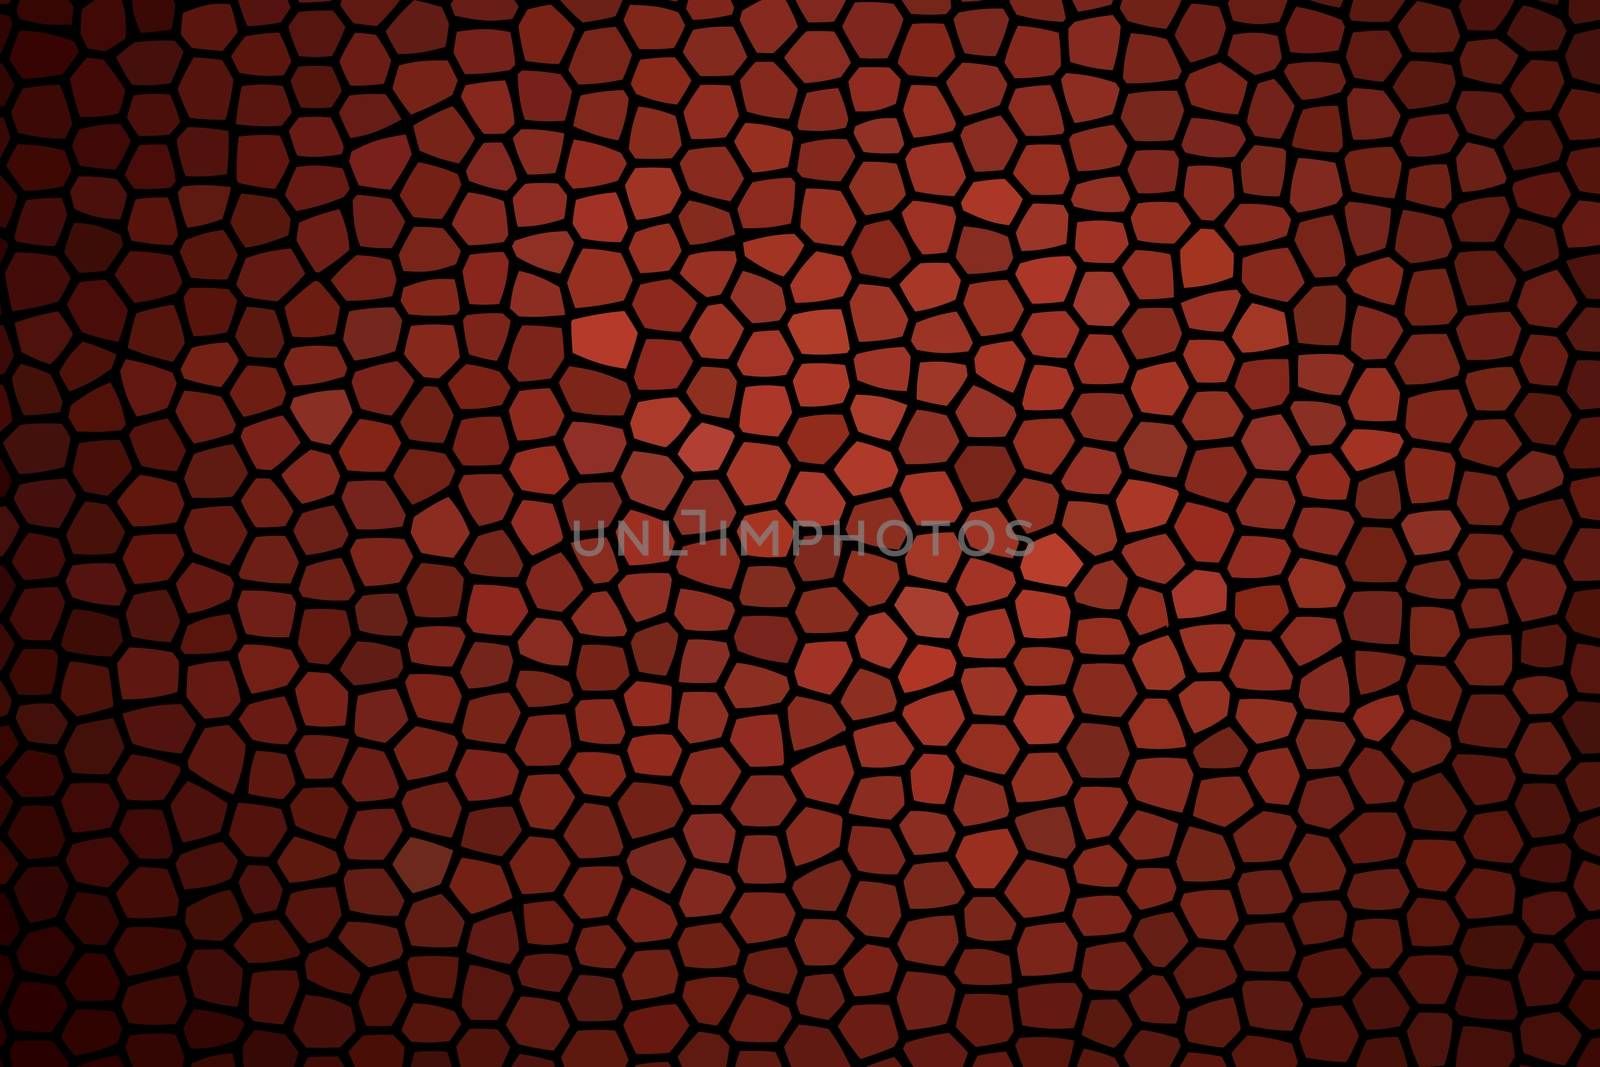 The abstract Red pebble on black background. For decoration, printing, cover, design.